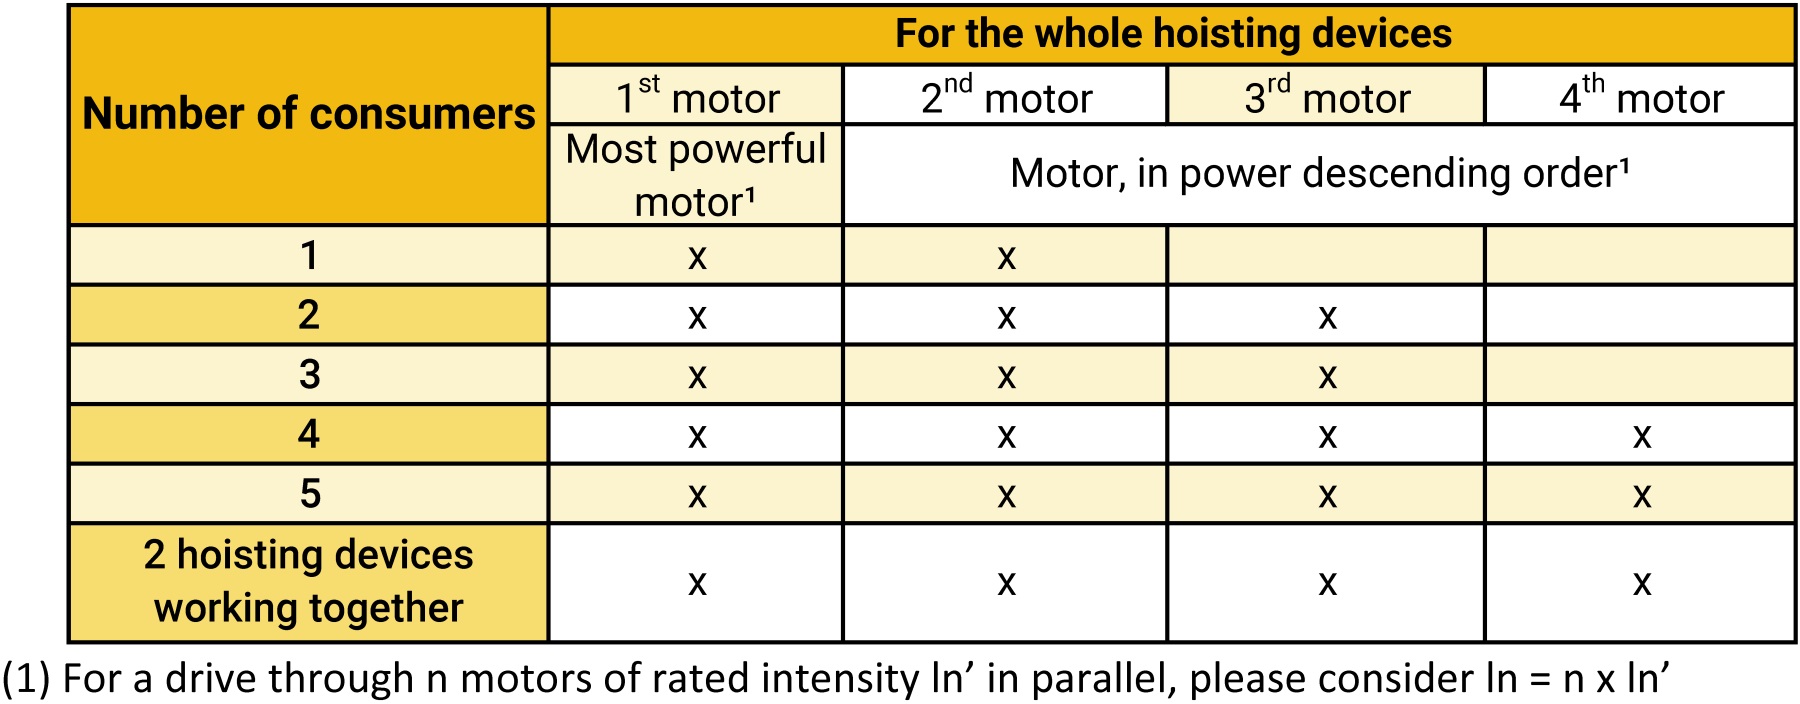 Number of Motor to take in account